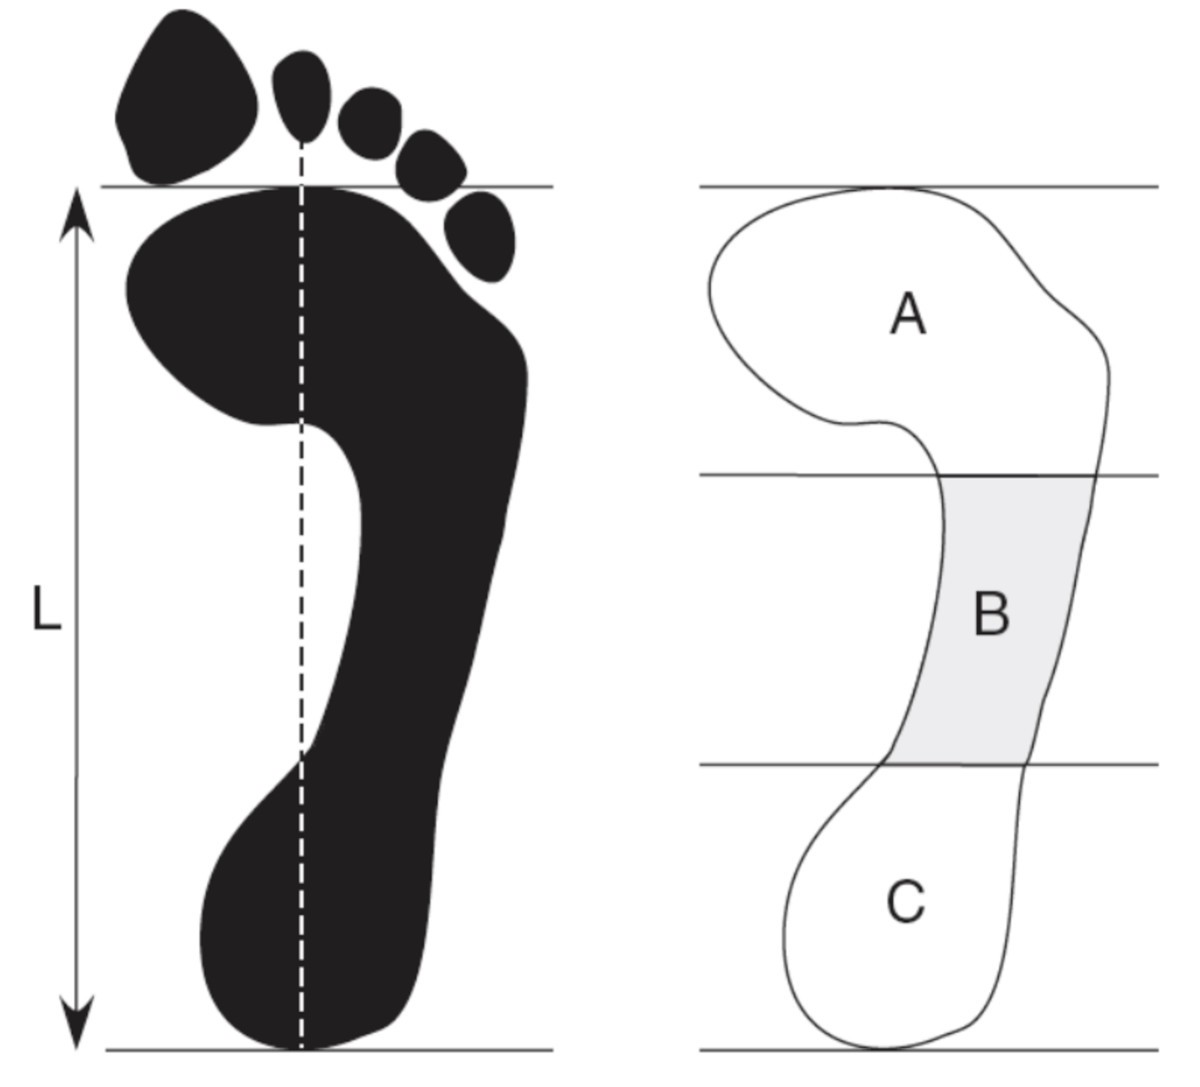 Foot posture influences the electromyographic activity of selected ...